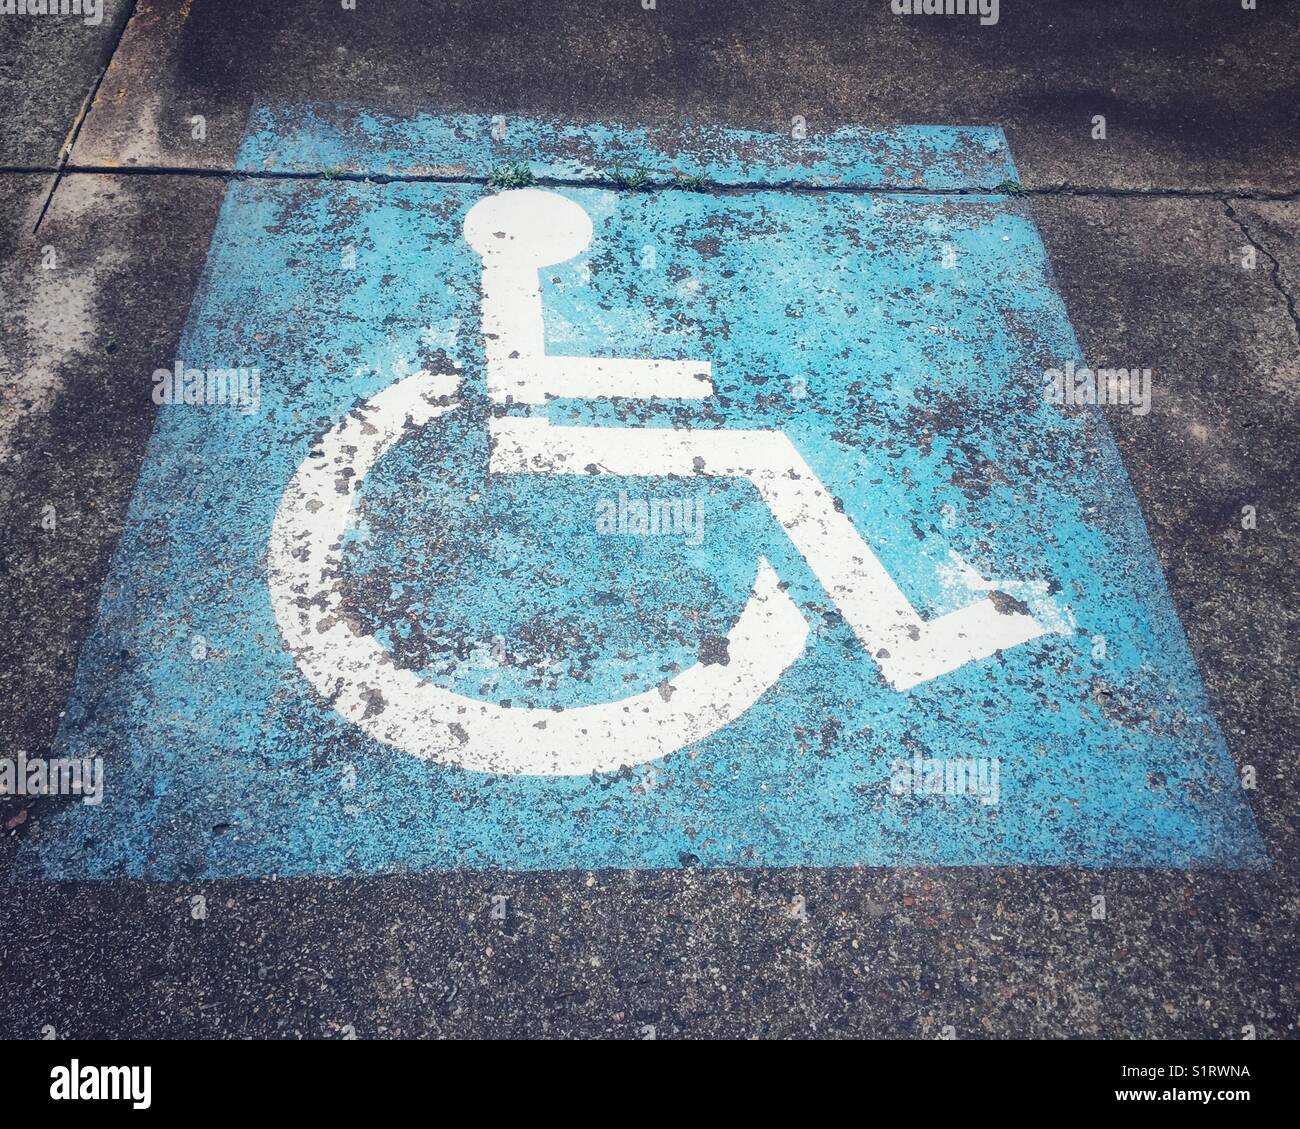 Disable wheelchair symbol stencil in white on blue square in car park. Closeup communication sign on disability car park. Stock Photo